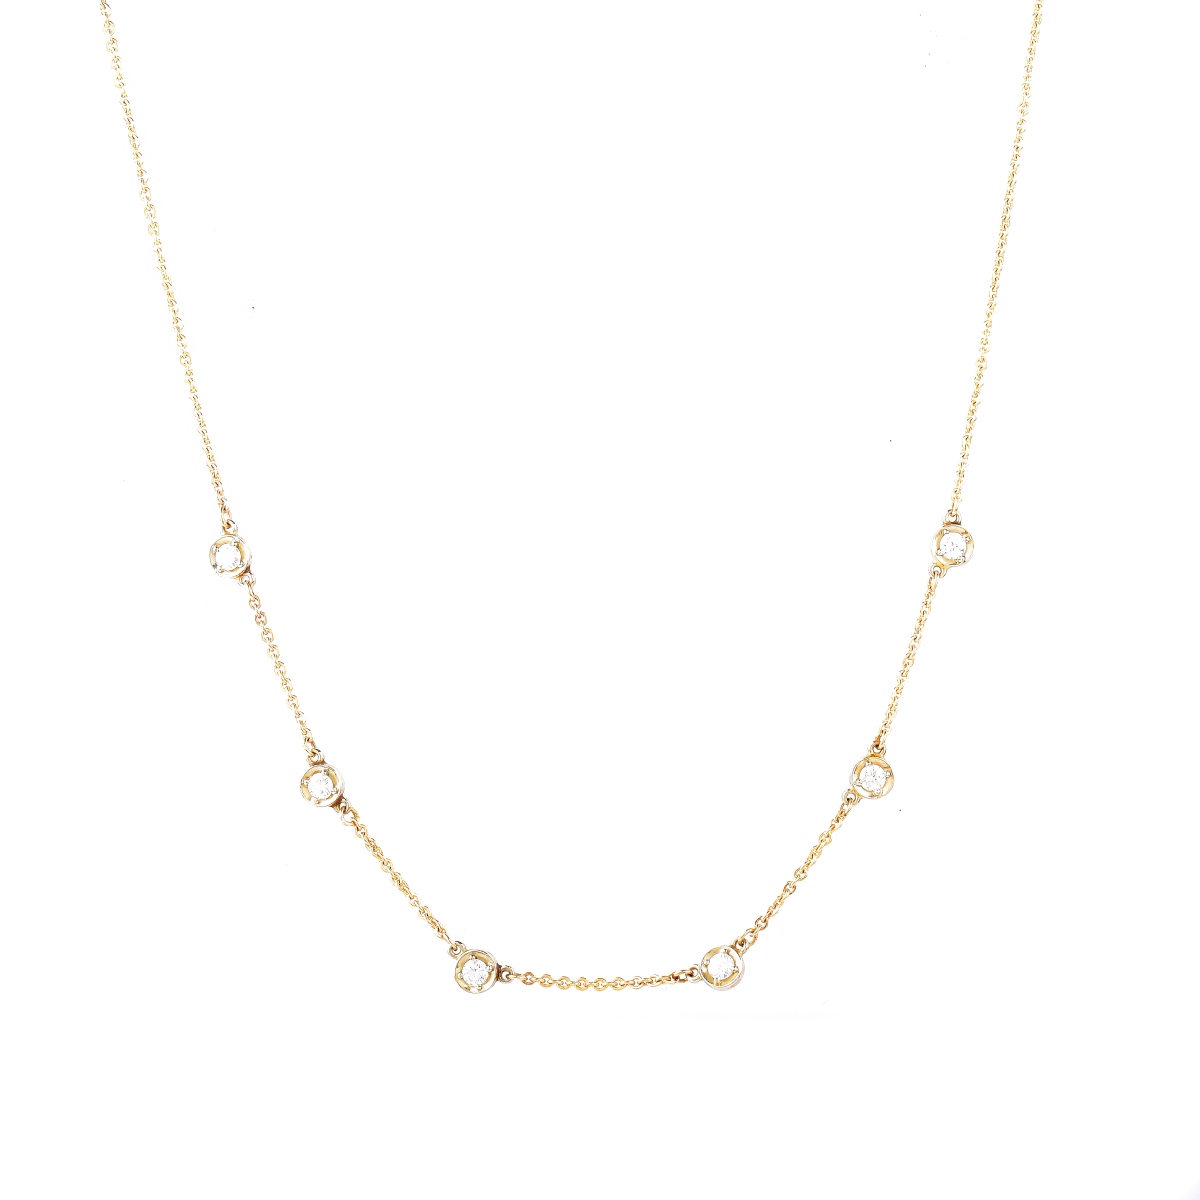 Diamond and 14K Gold Necklace